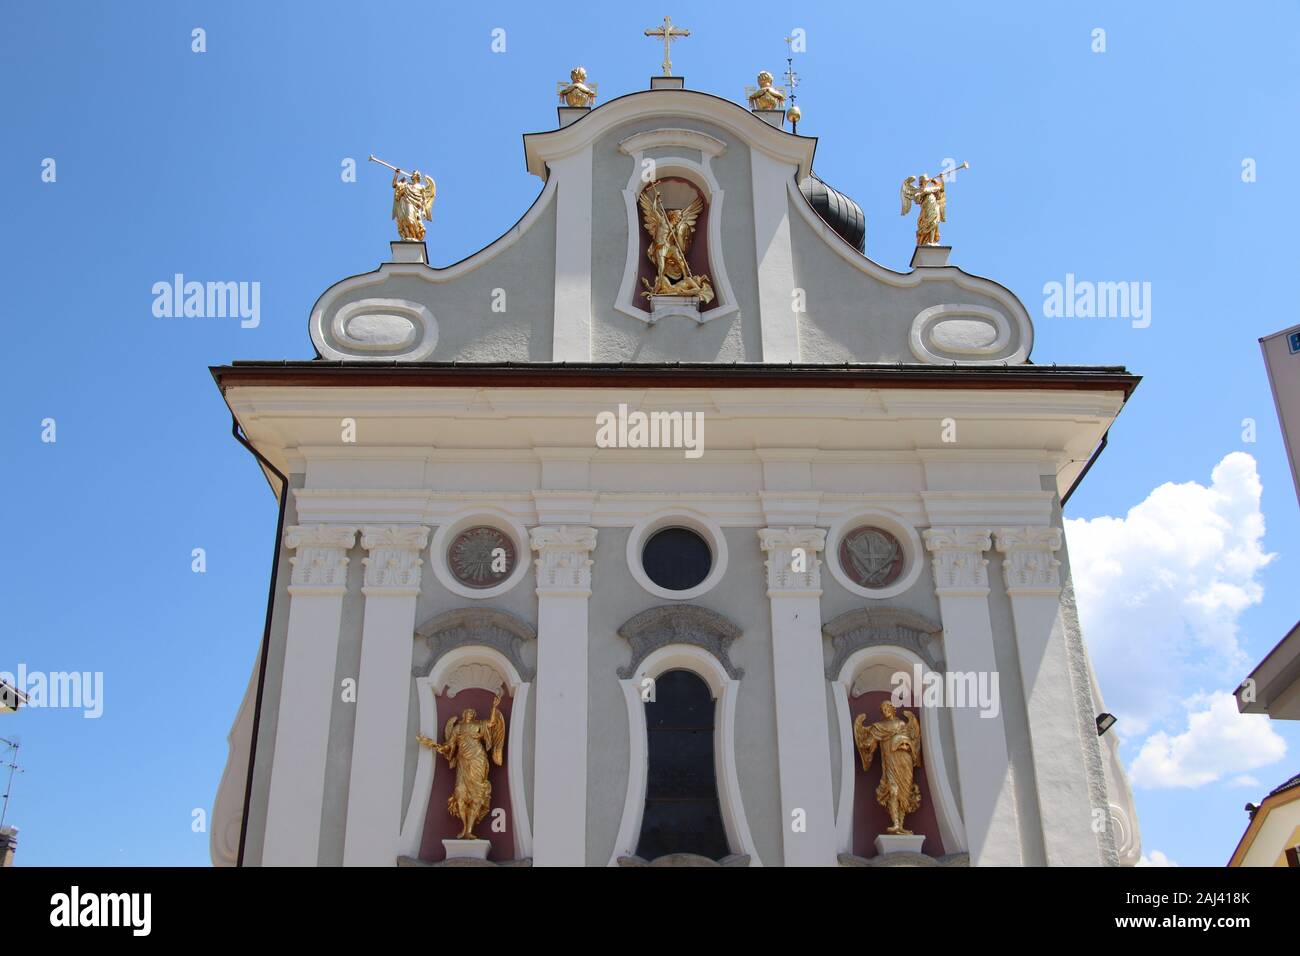 church in San Candido. San Candido is located in the Puster Valley in Italy Stock Photo